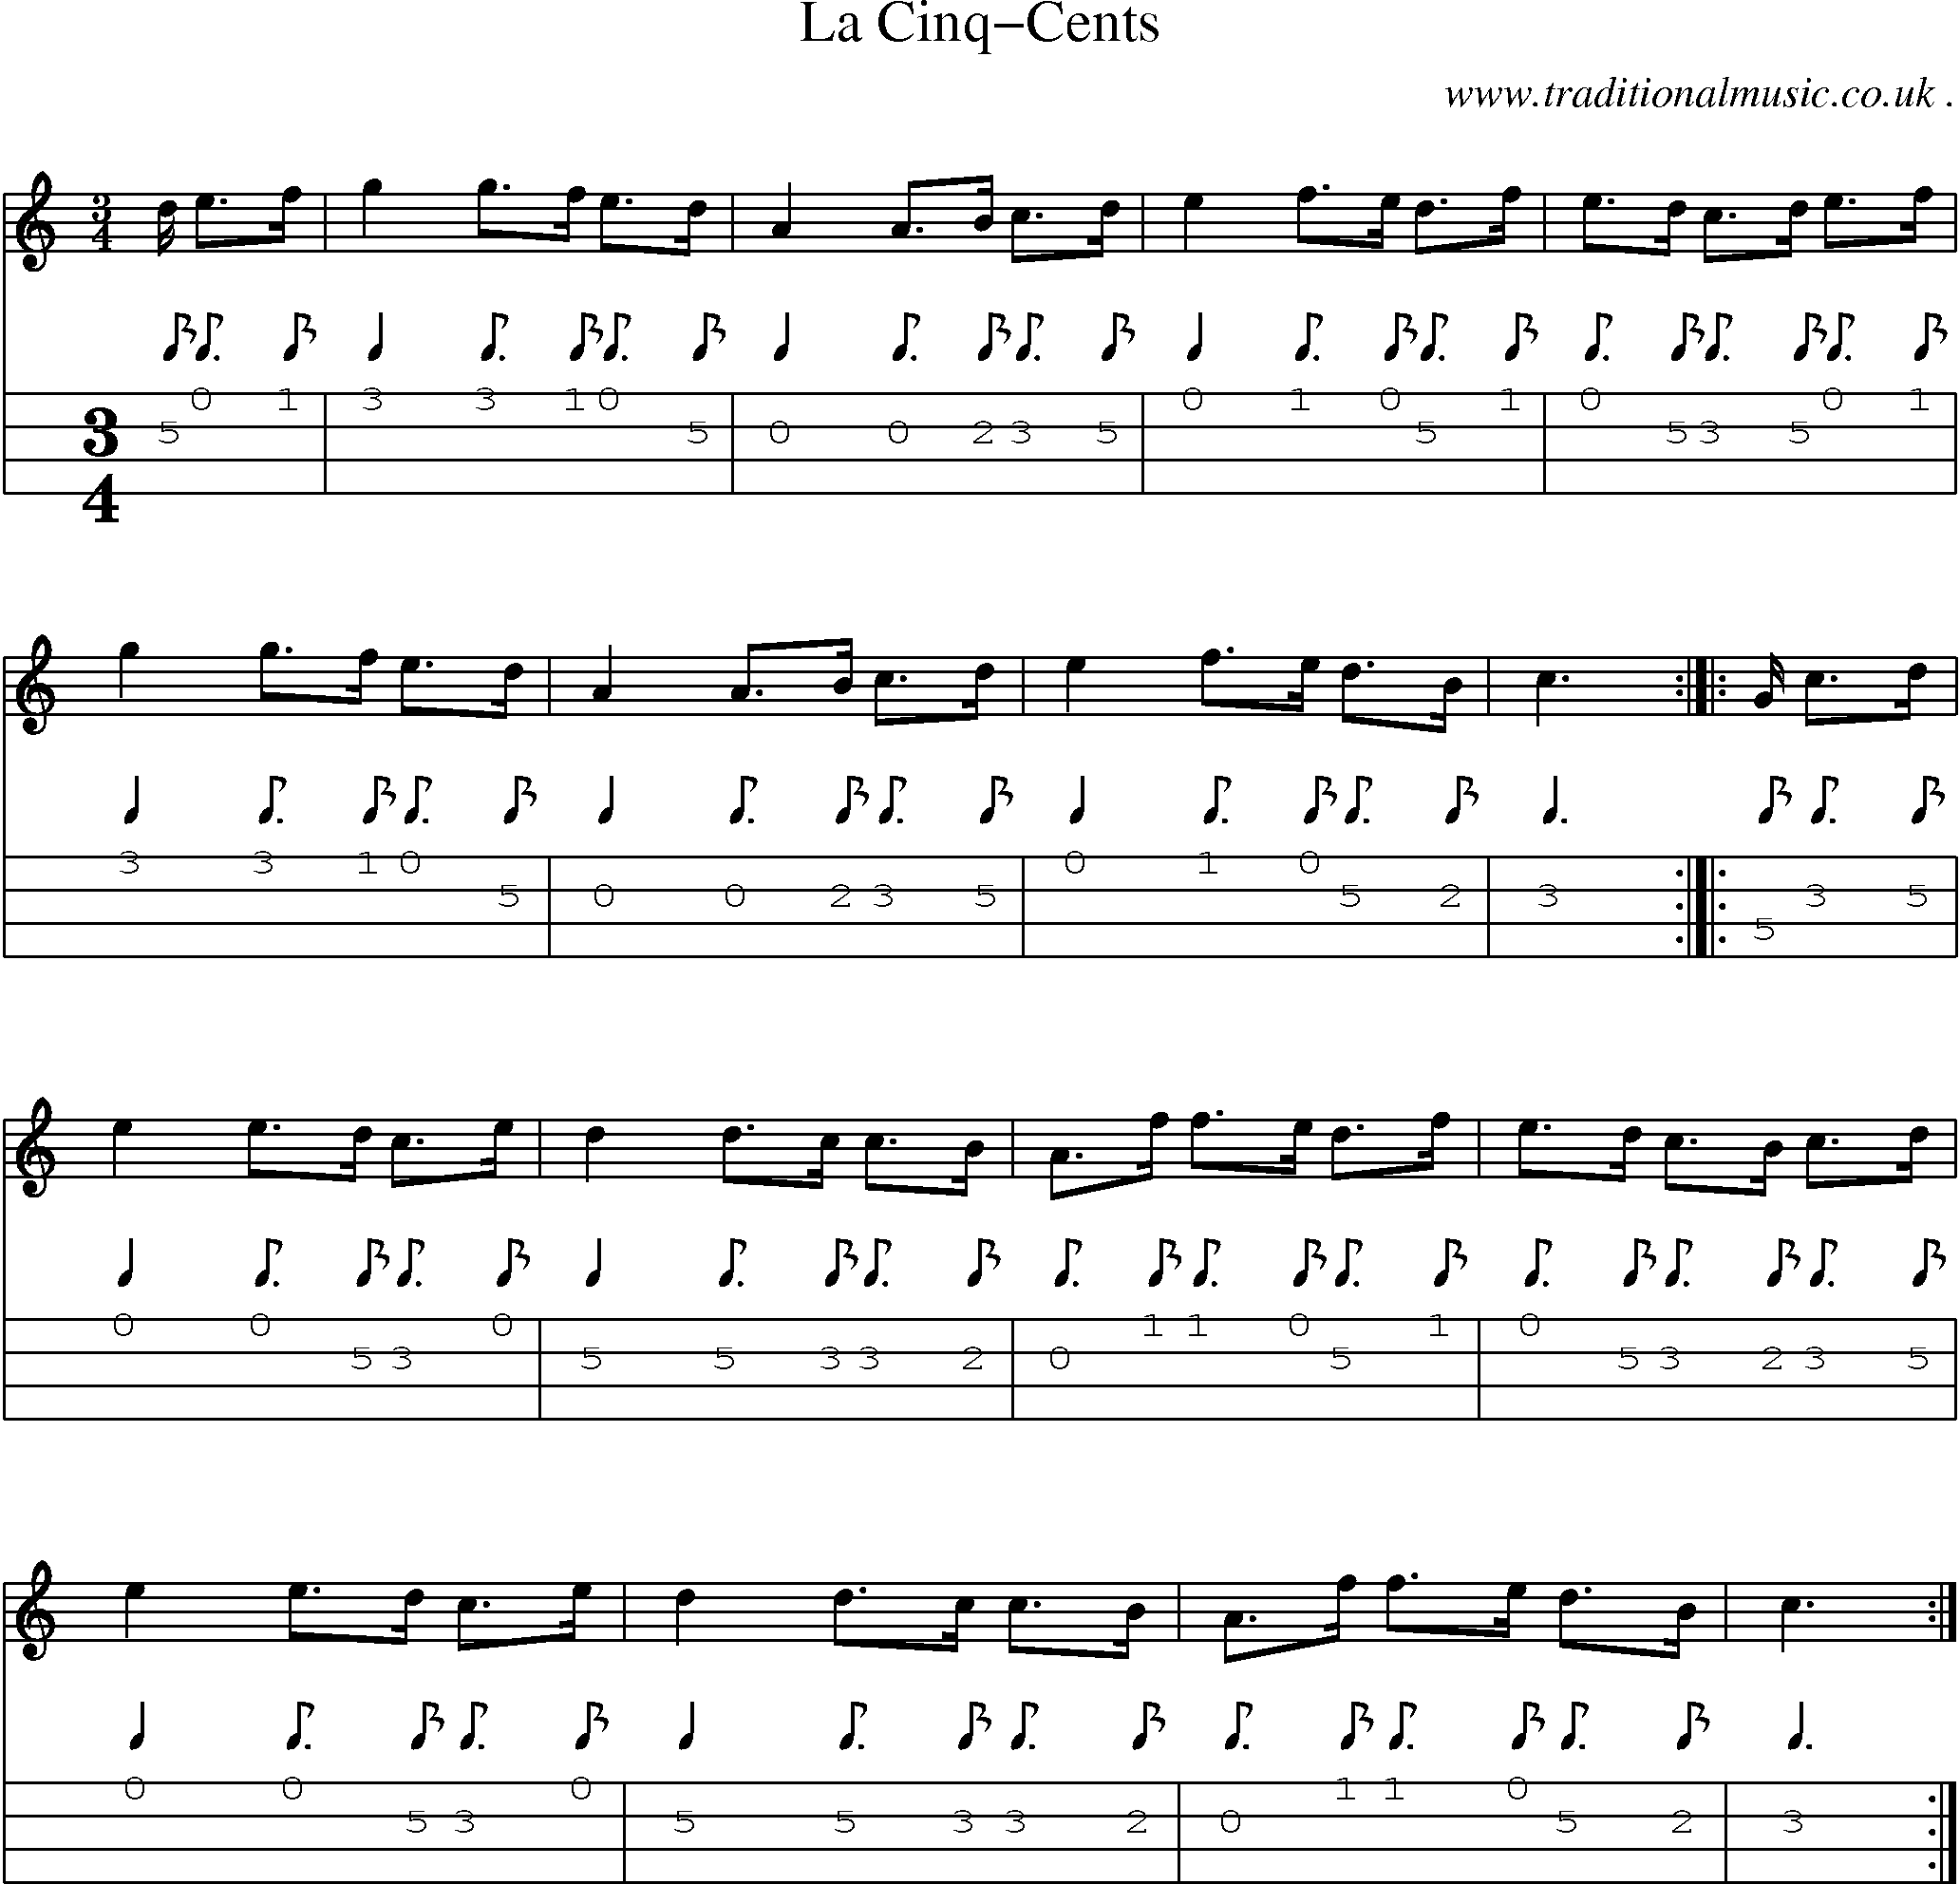 Sheet-Music and Mandolin Tabs for La Cinq-cents